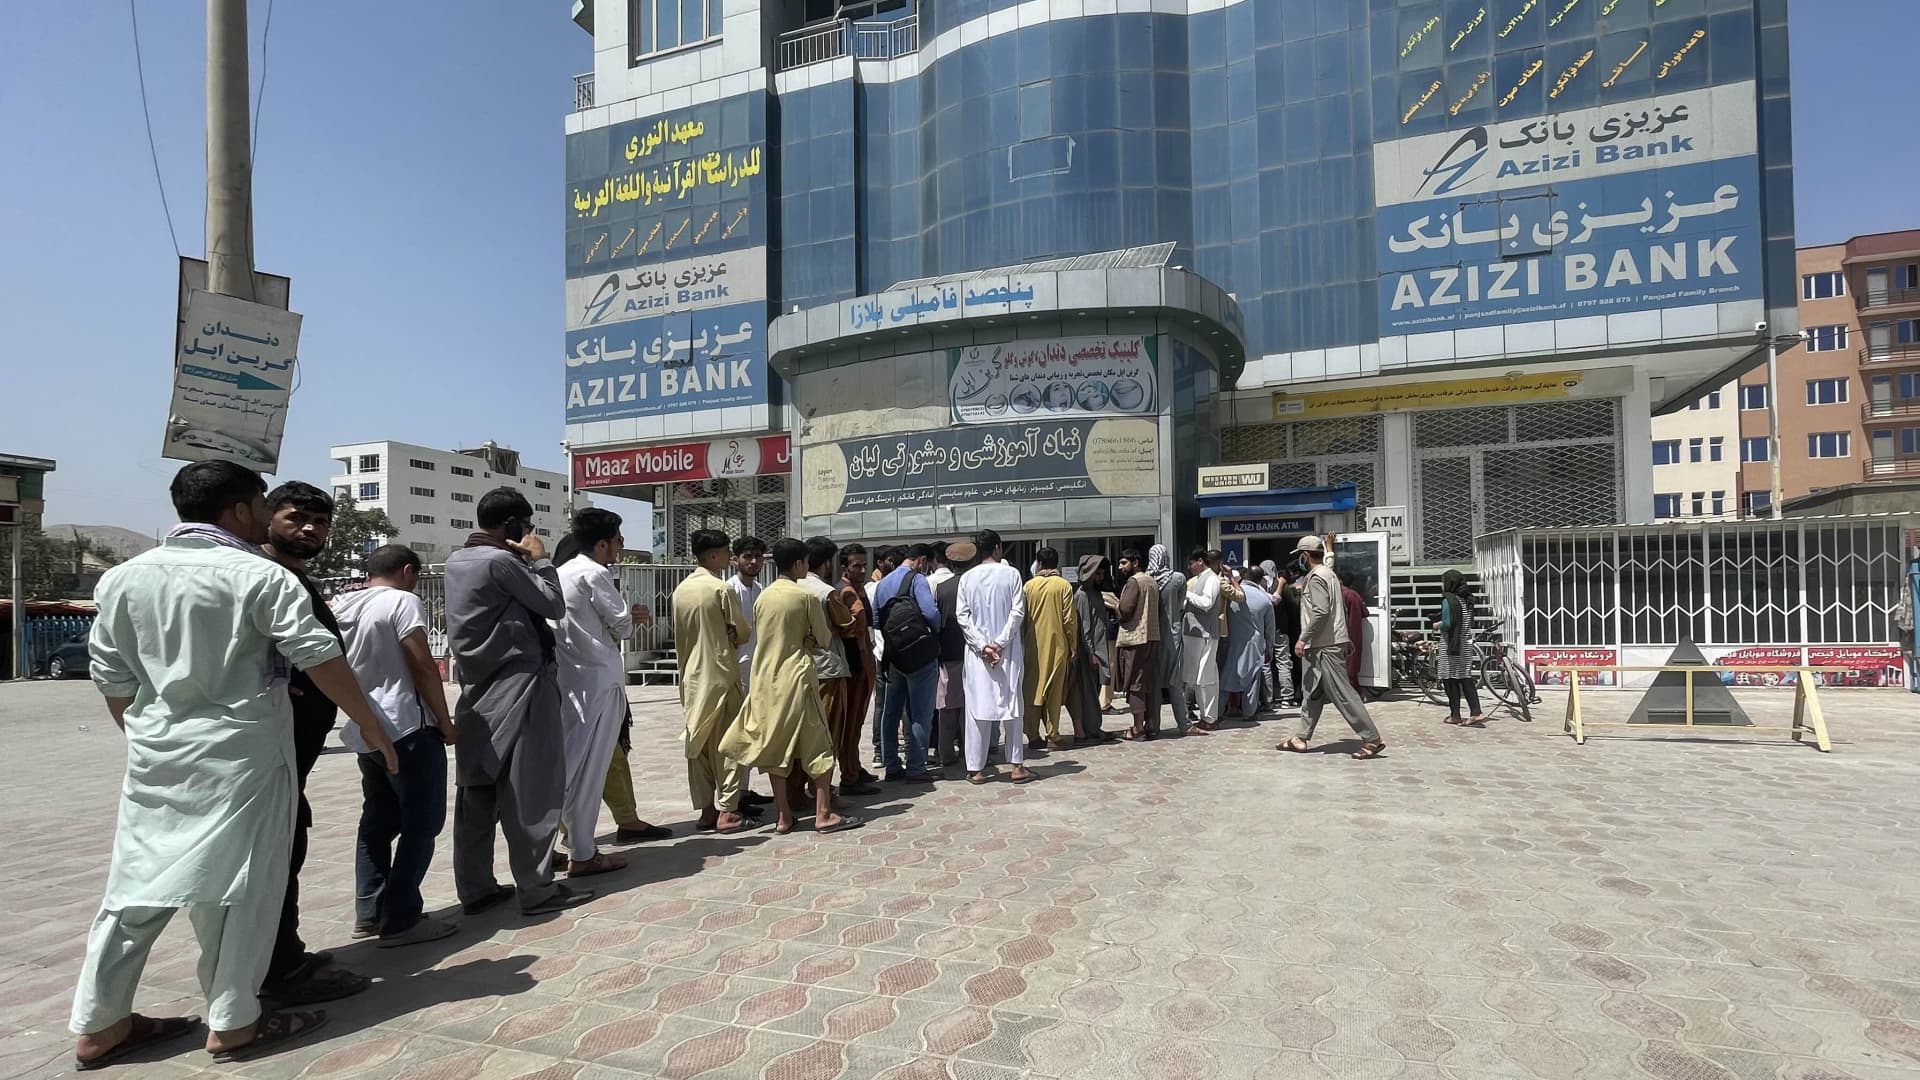 Afghan people line up outside AZIZI Bank to take out cash as the Bank suffers amid money crises in Kabul, Afghanistan, on August 15, 2021.